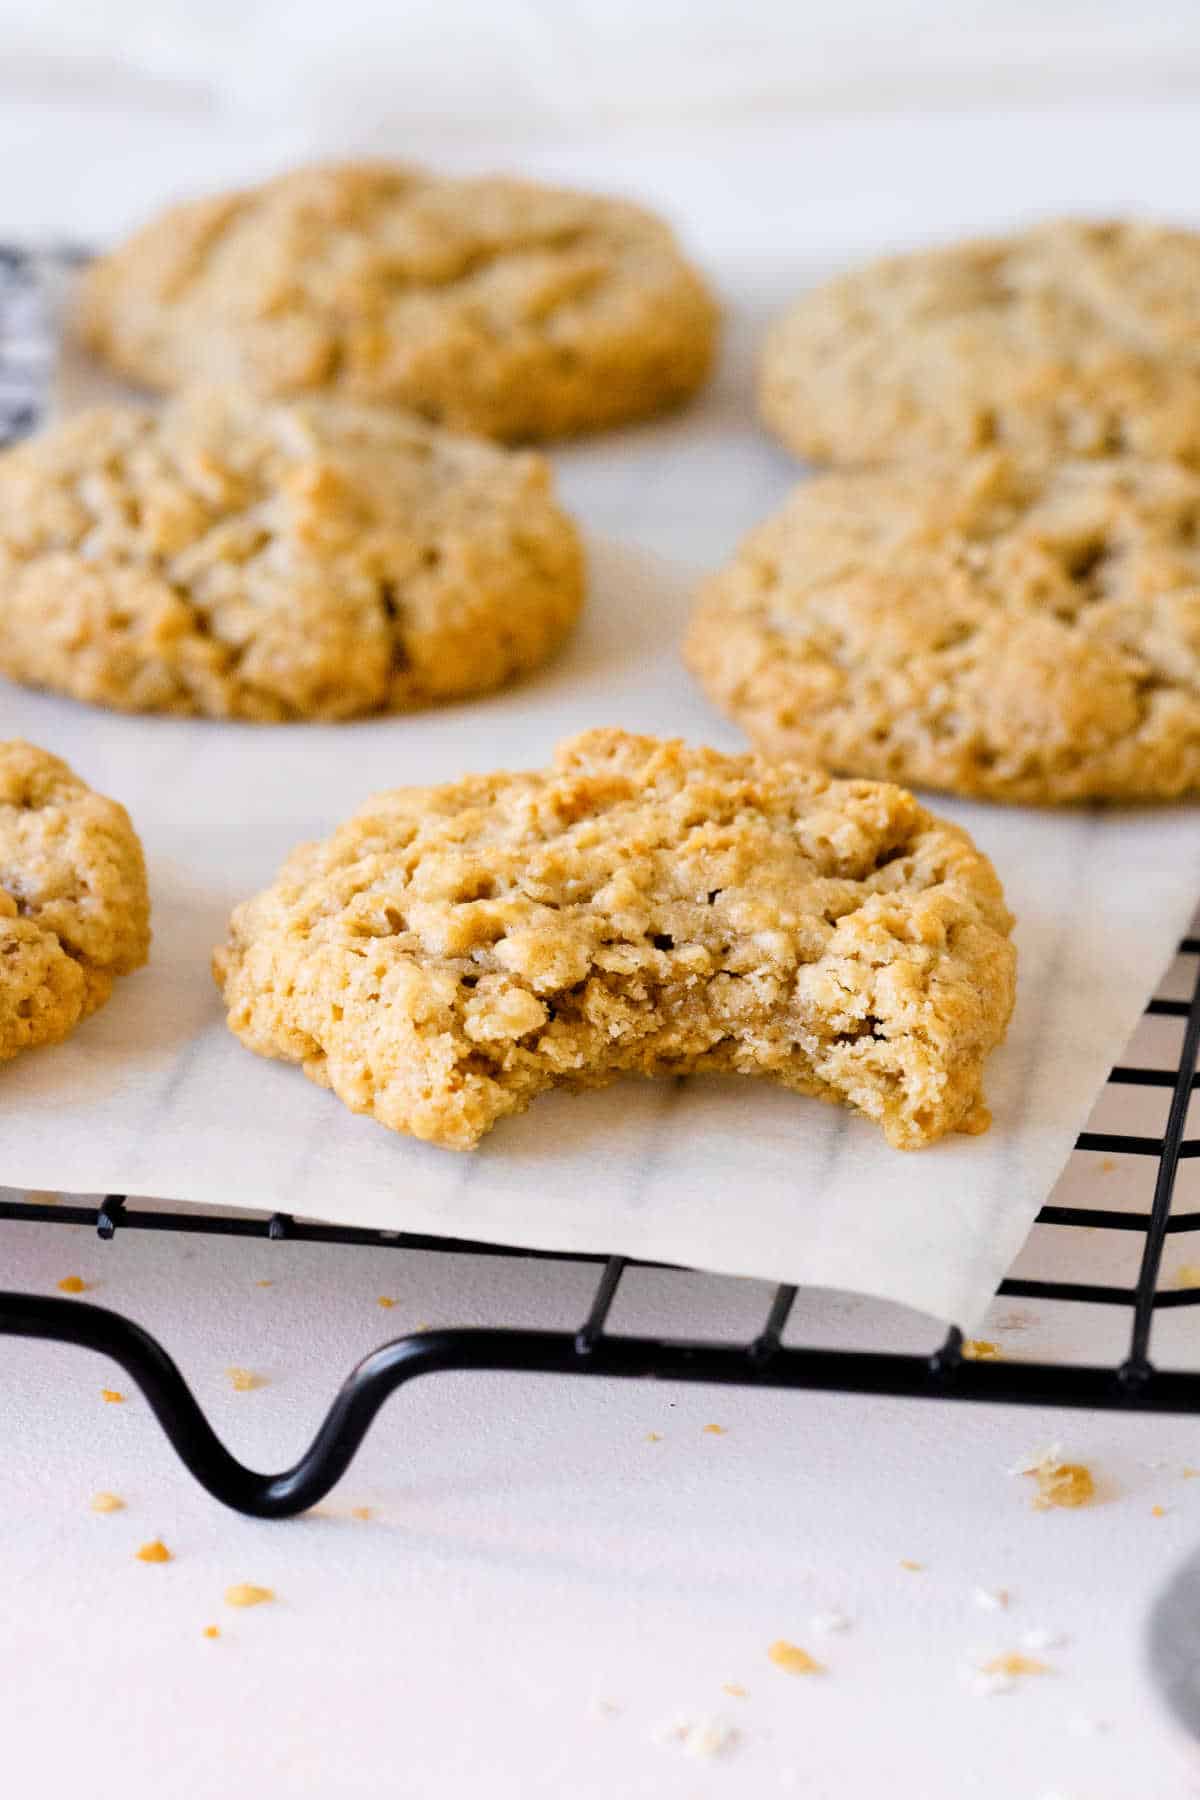 Bitten oatmeal cookie with several whole ones on parchment paper on a black wire rack.